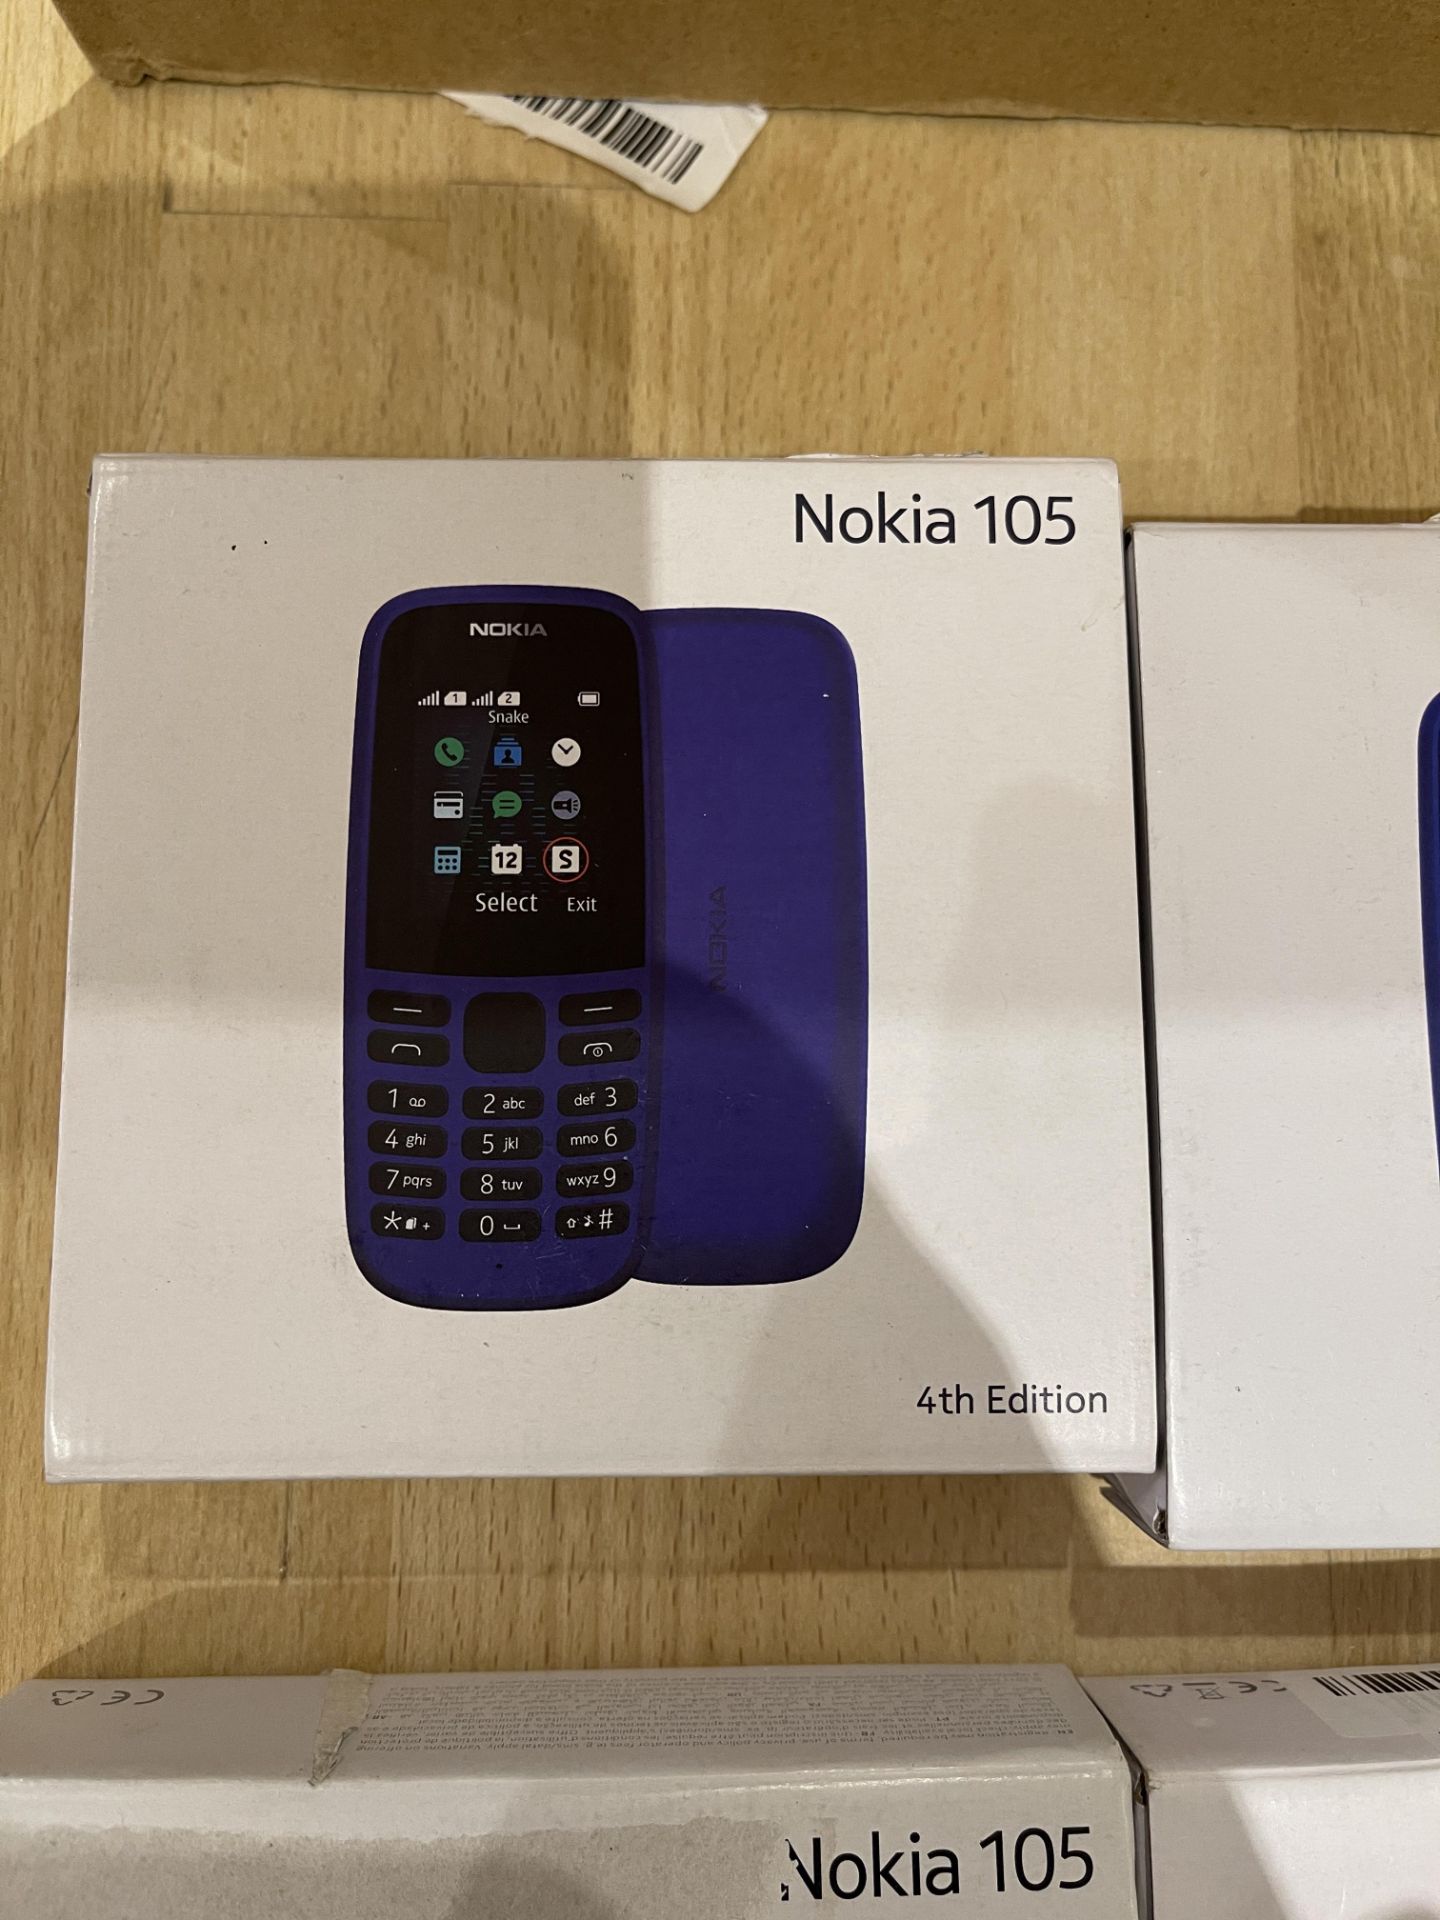 6: Nokia 105 Dual Sim Mobile Phones, Boxes Have Been Opened, Phone, Battery & Charger All Present - - Image 3 of 15